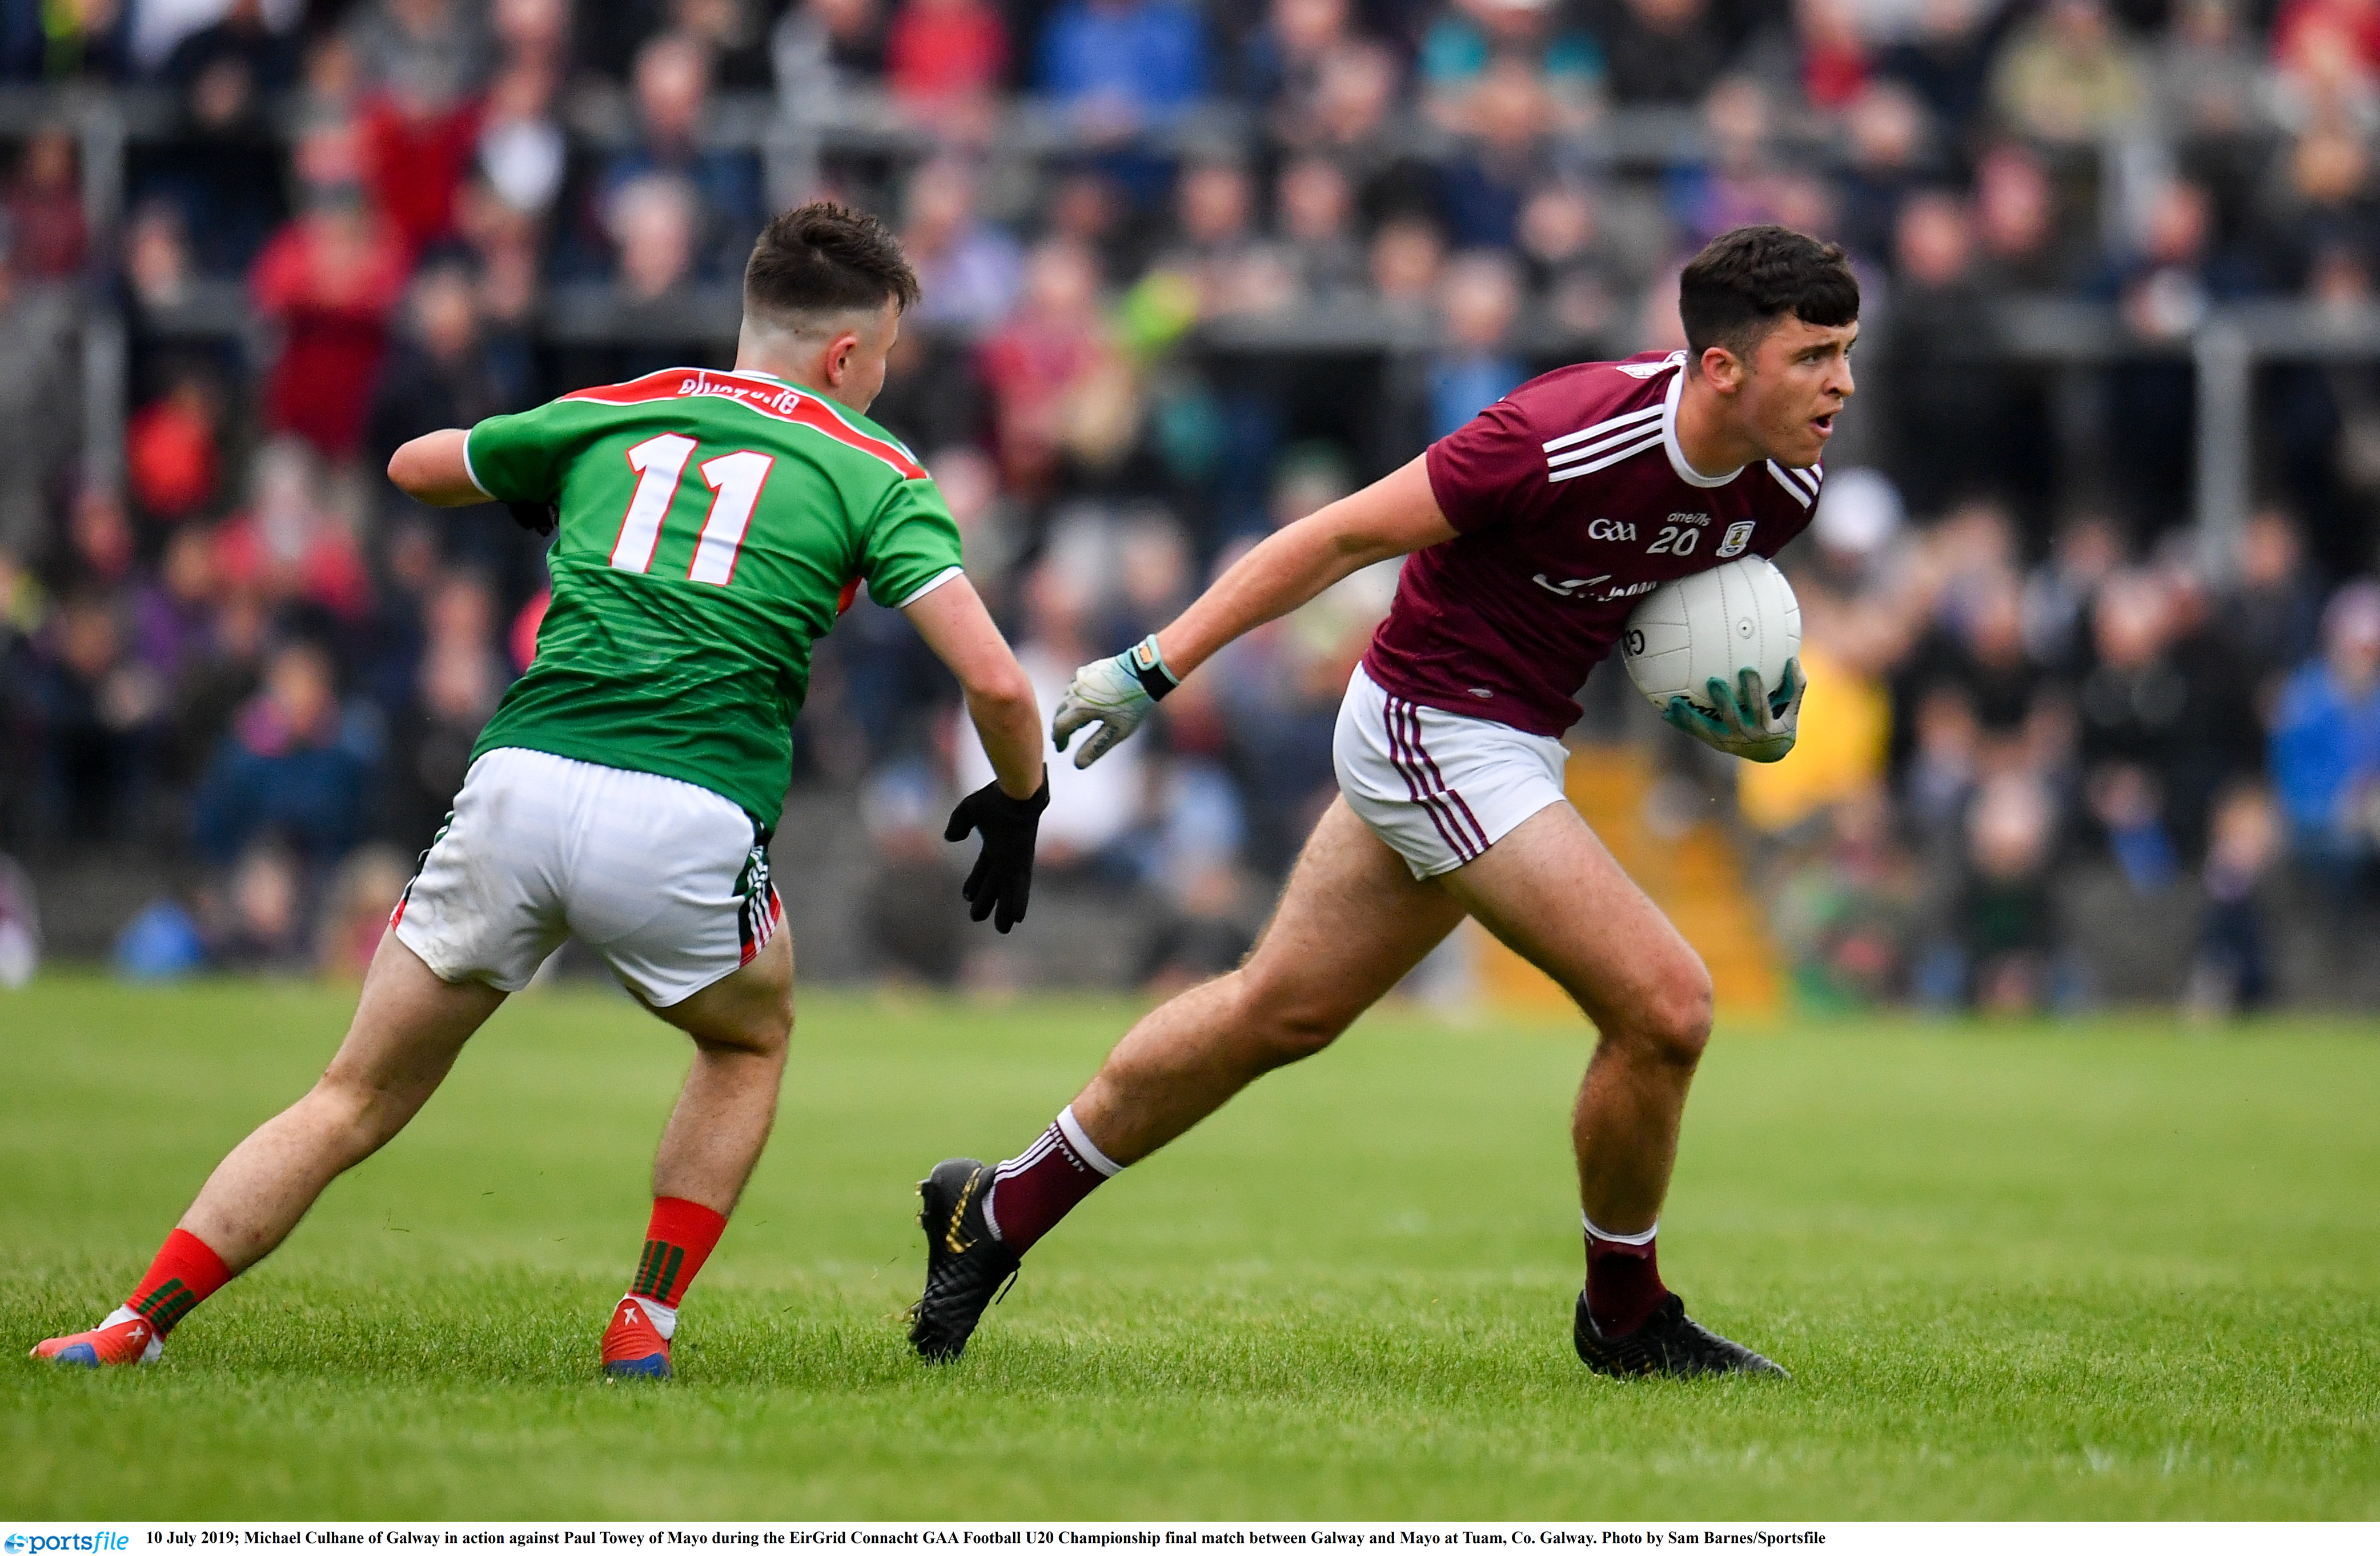 Galway are Connacht Under 20 Champions for 2019